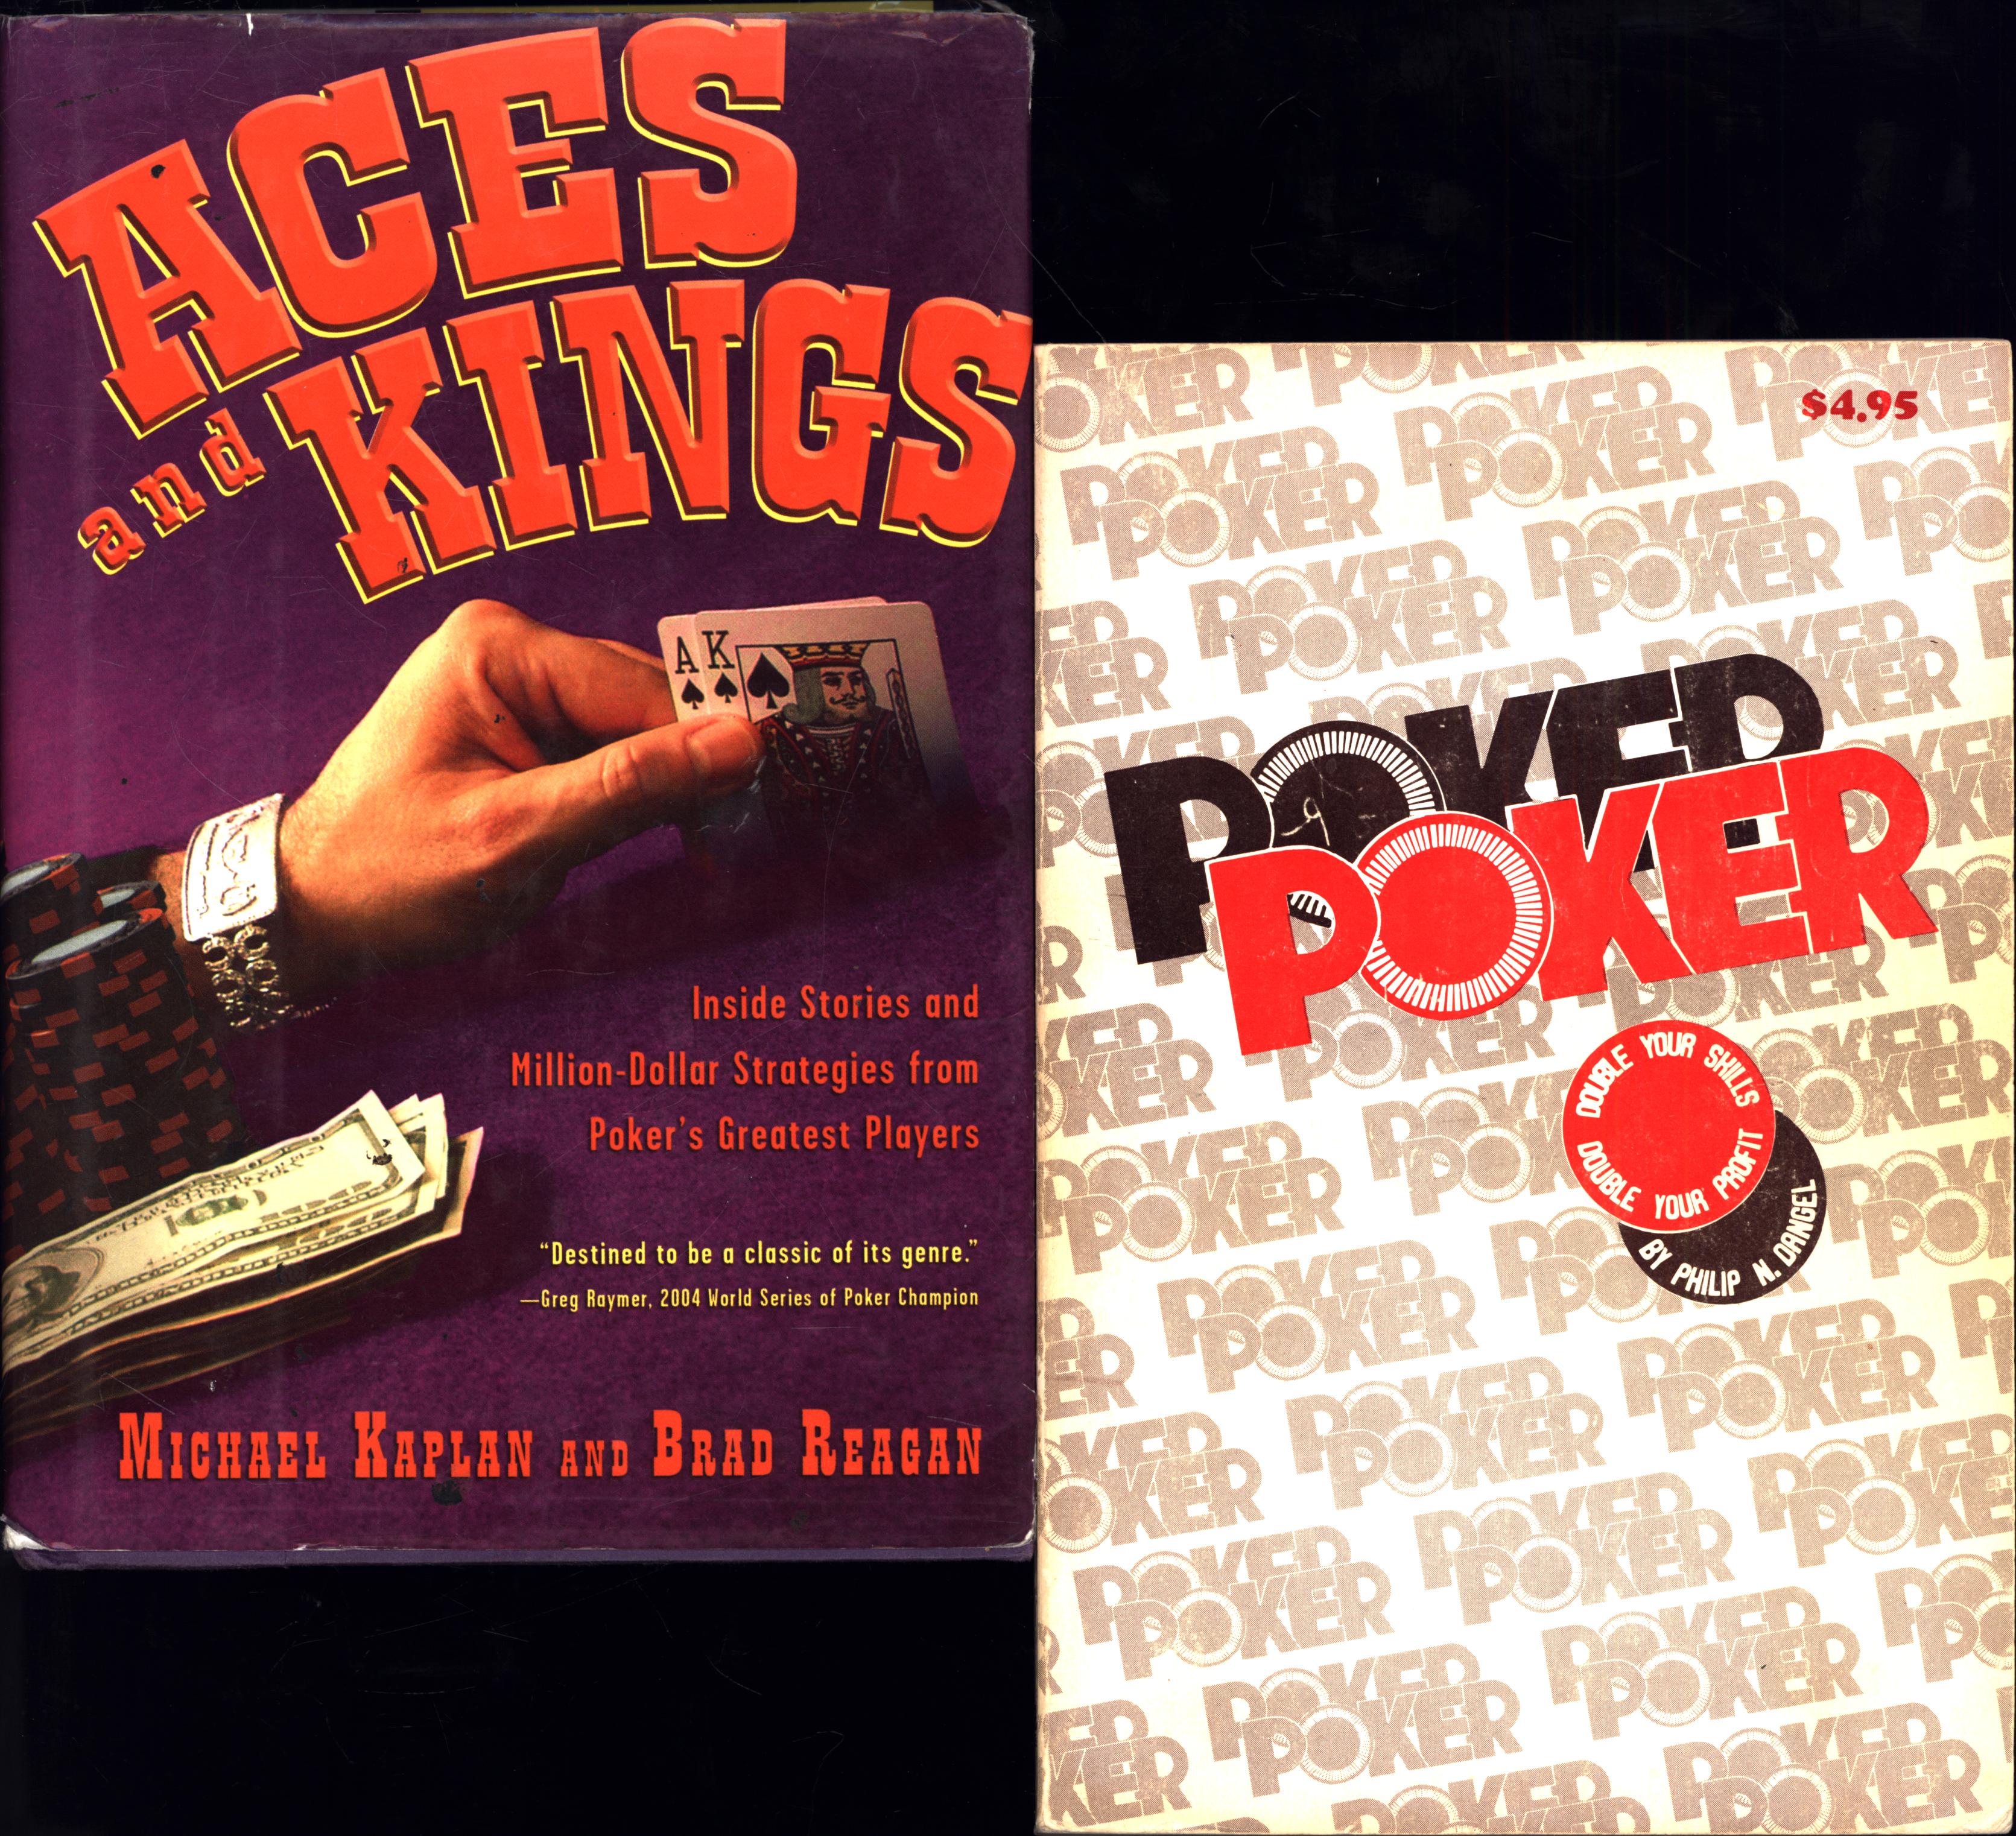 Poker Poker / Double Your Skills Double Your Profit (SIGNED), AND A SECOND BOOK, Aces and Kings / Inside Stories and Million-Dollar Strategies from Poker's Greatest Player - Dangel, Philip N., AND A SECOND BOOK, by Michael Kaplan and Brad Reagan